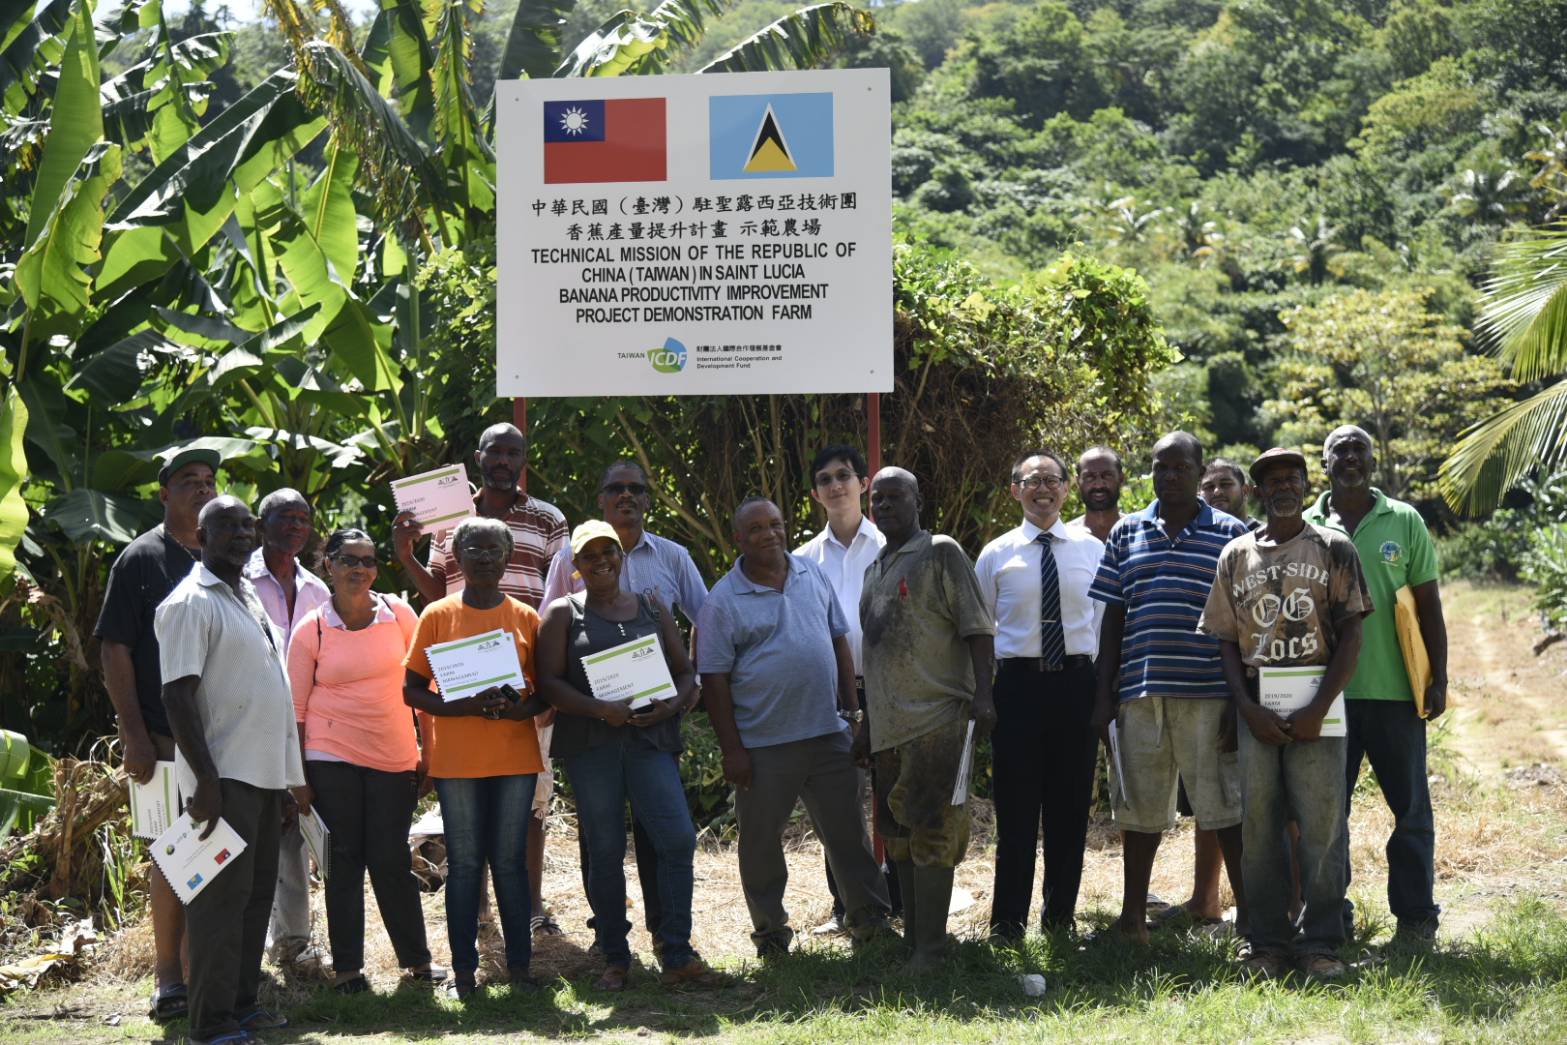 Taiwan Technical Mission in St. Lucia assists the export of bananas to Europe through technical cooperation